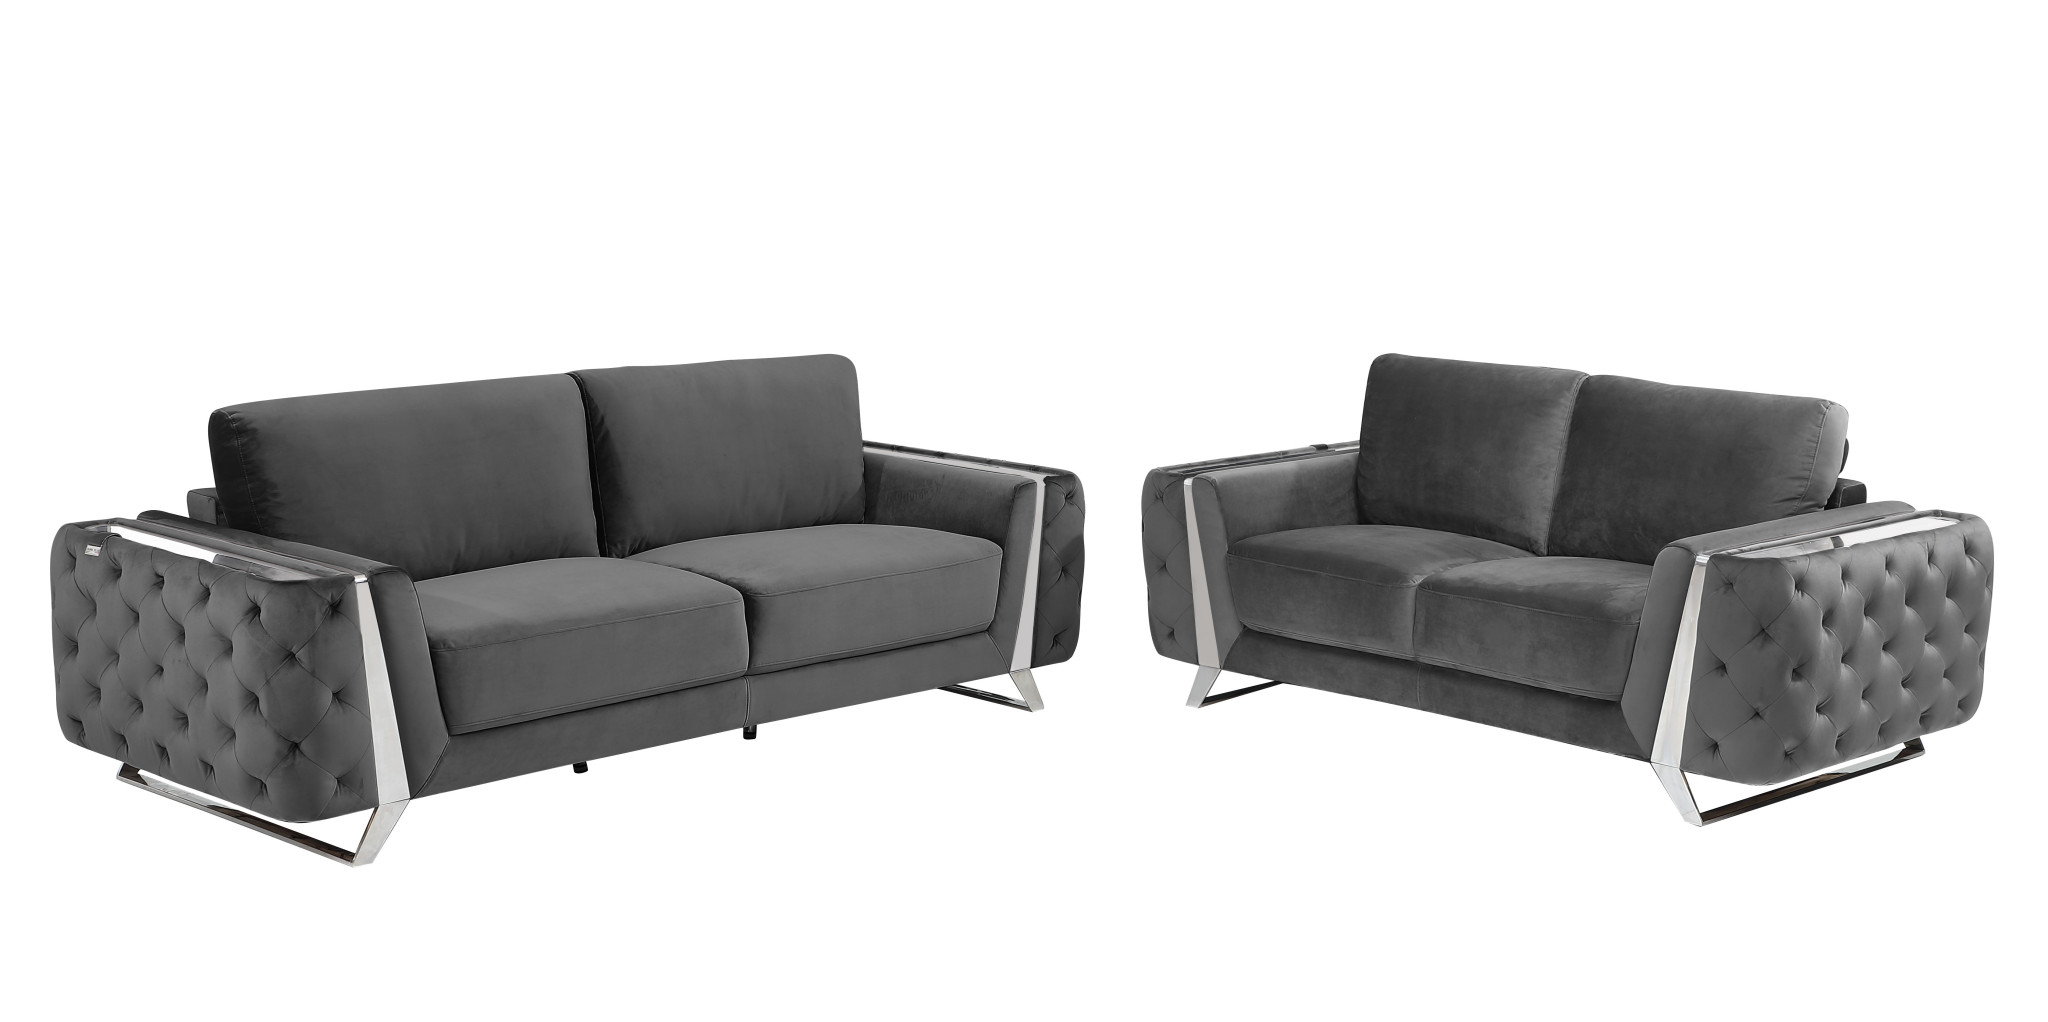 Two Piece Indoor Dark Gray Italian Leather Five Person Seating Set-518565-1